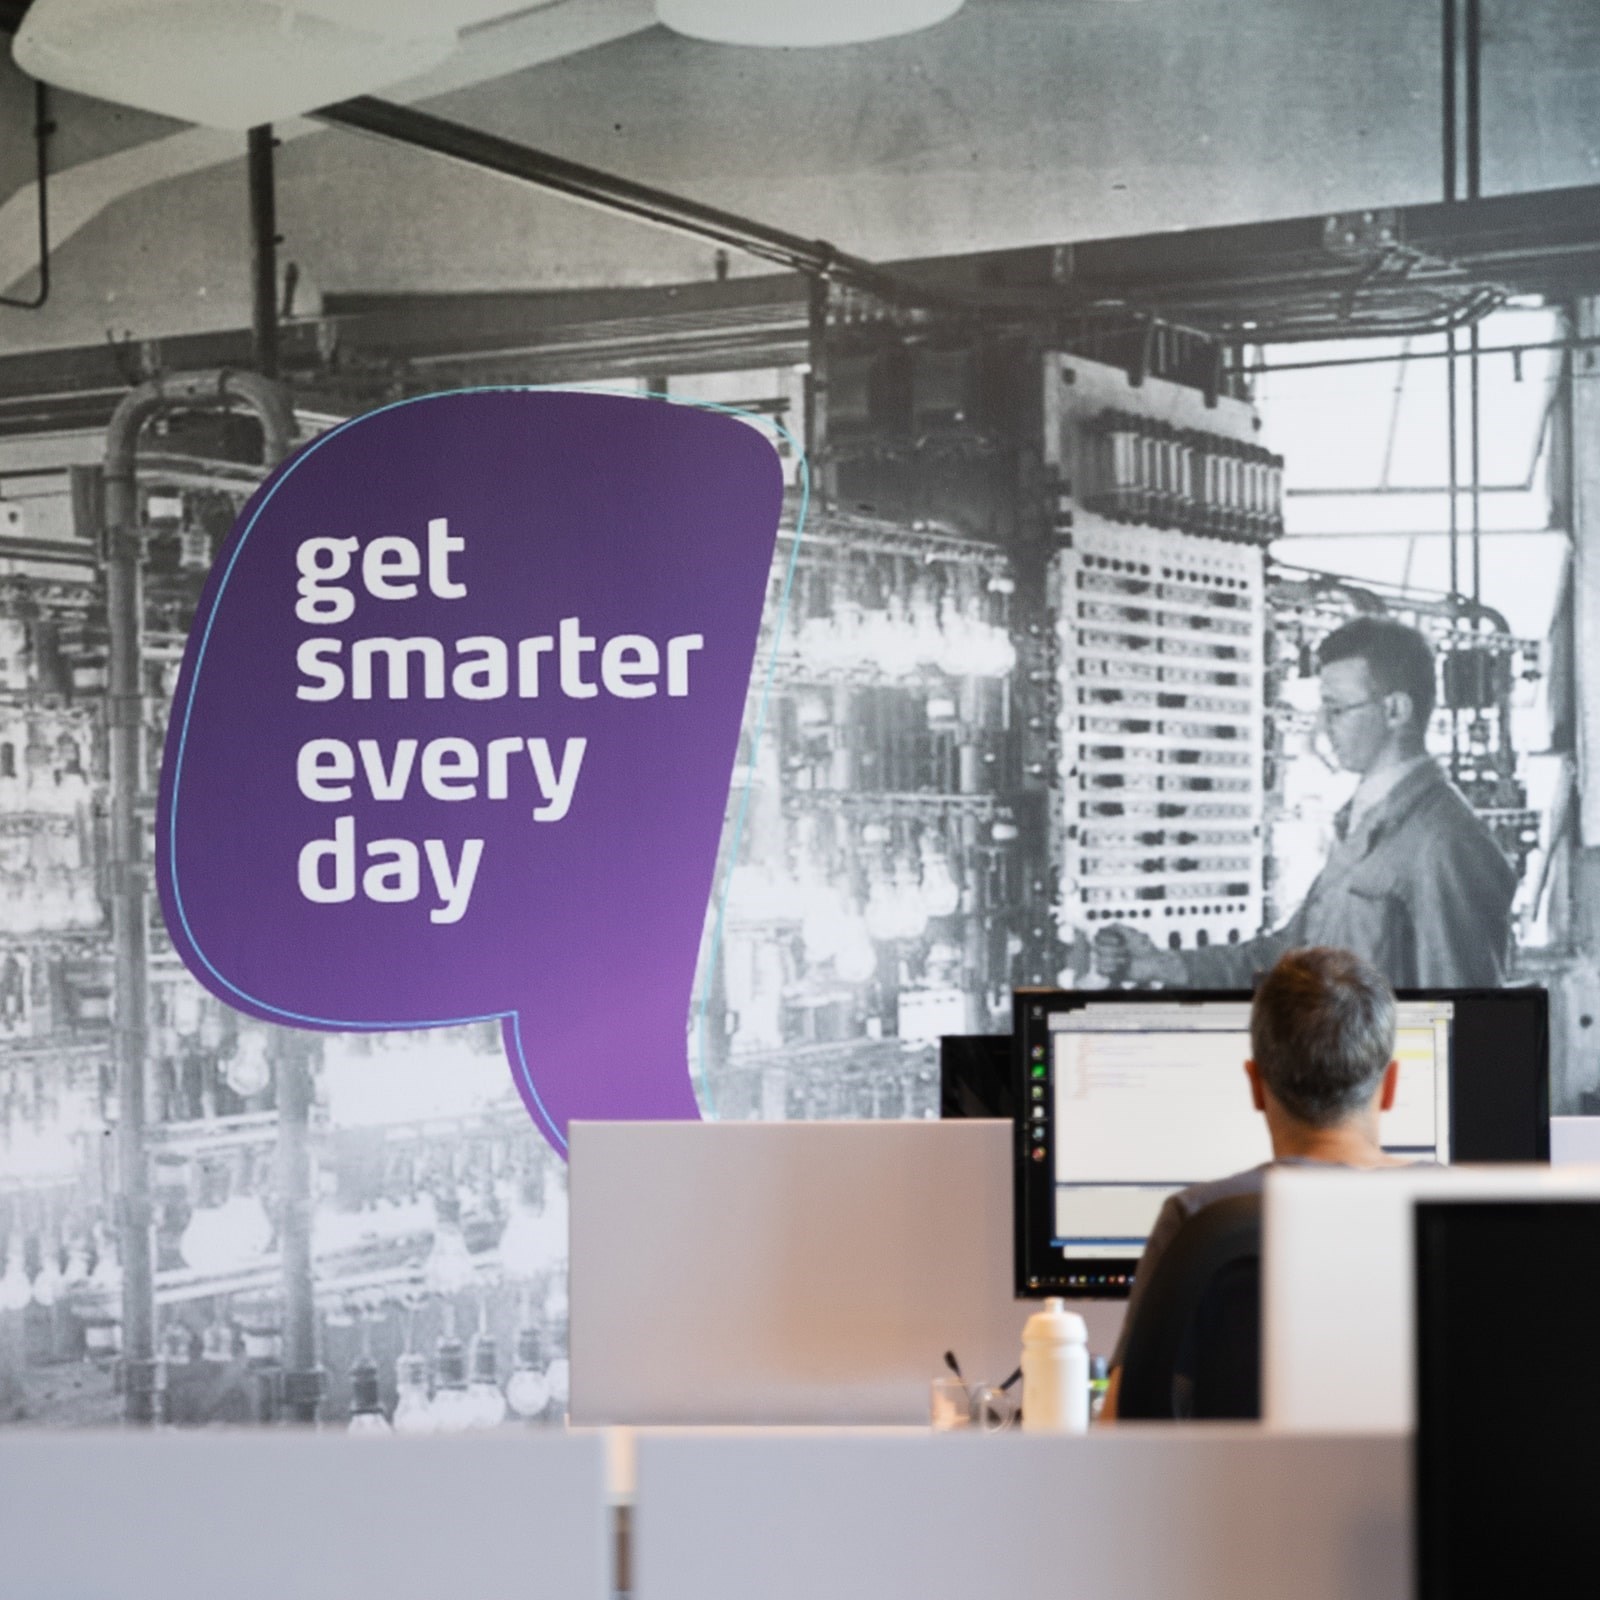 image of get smarter everyday office.